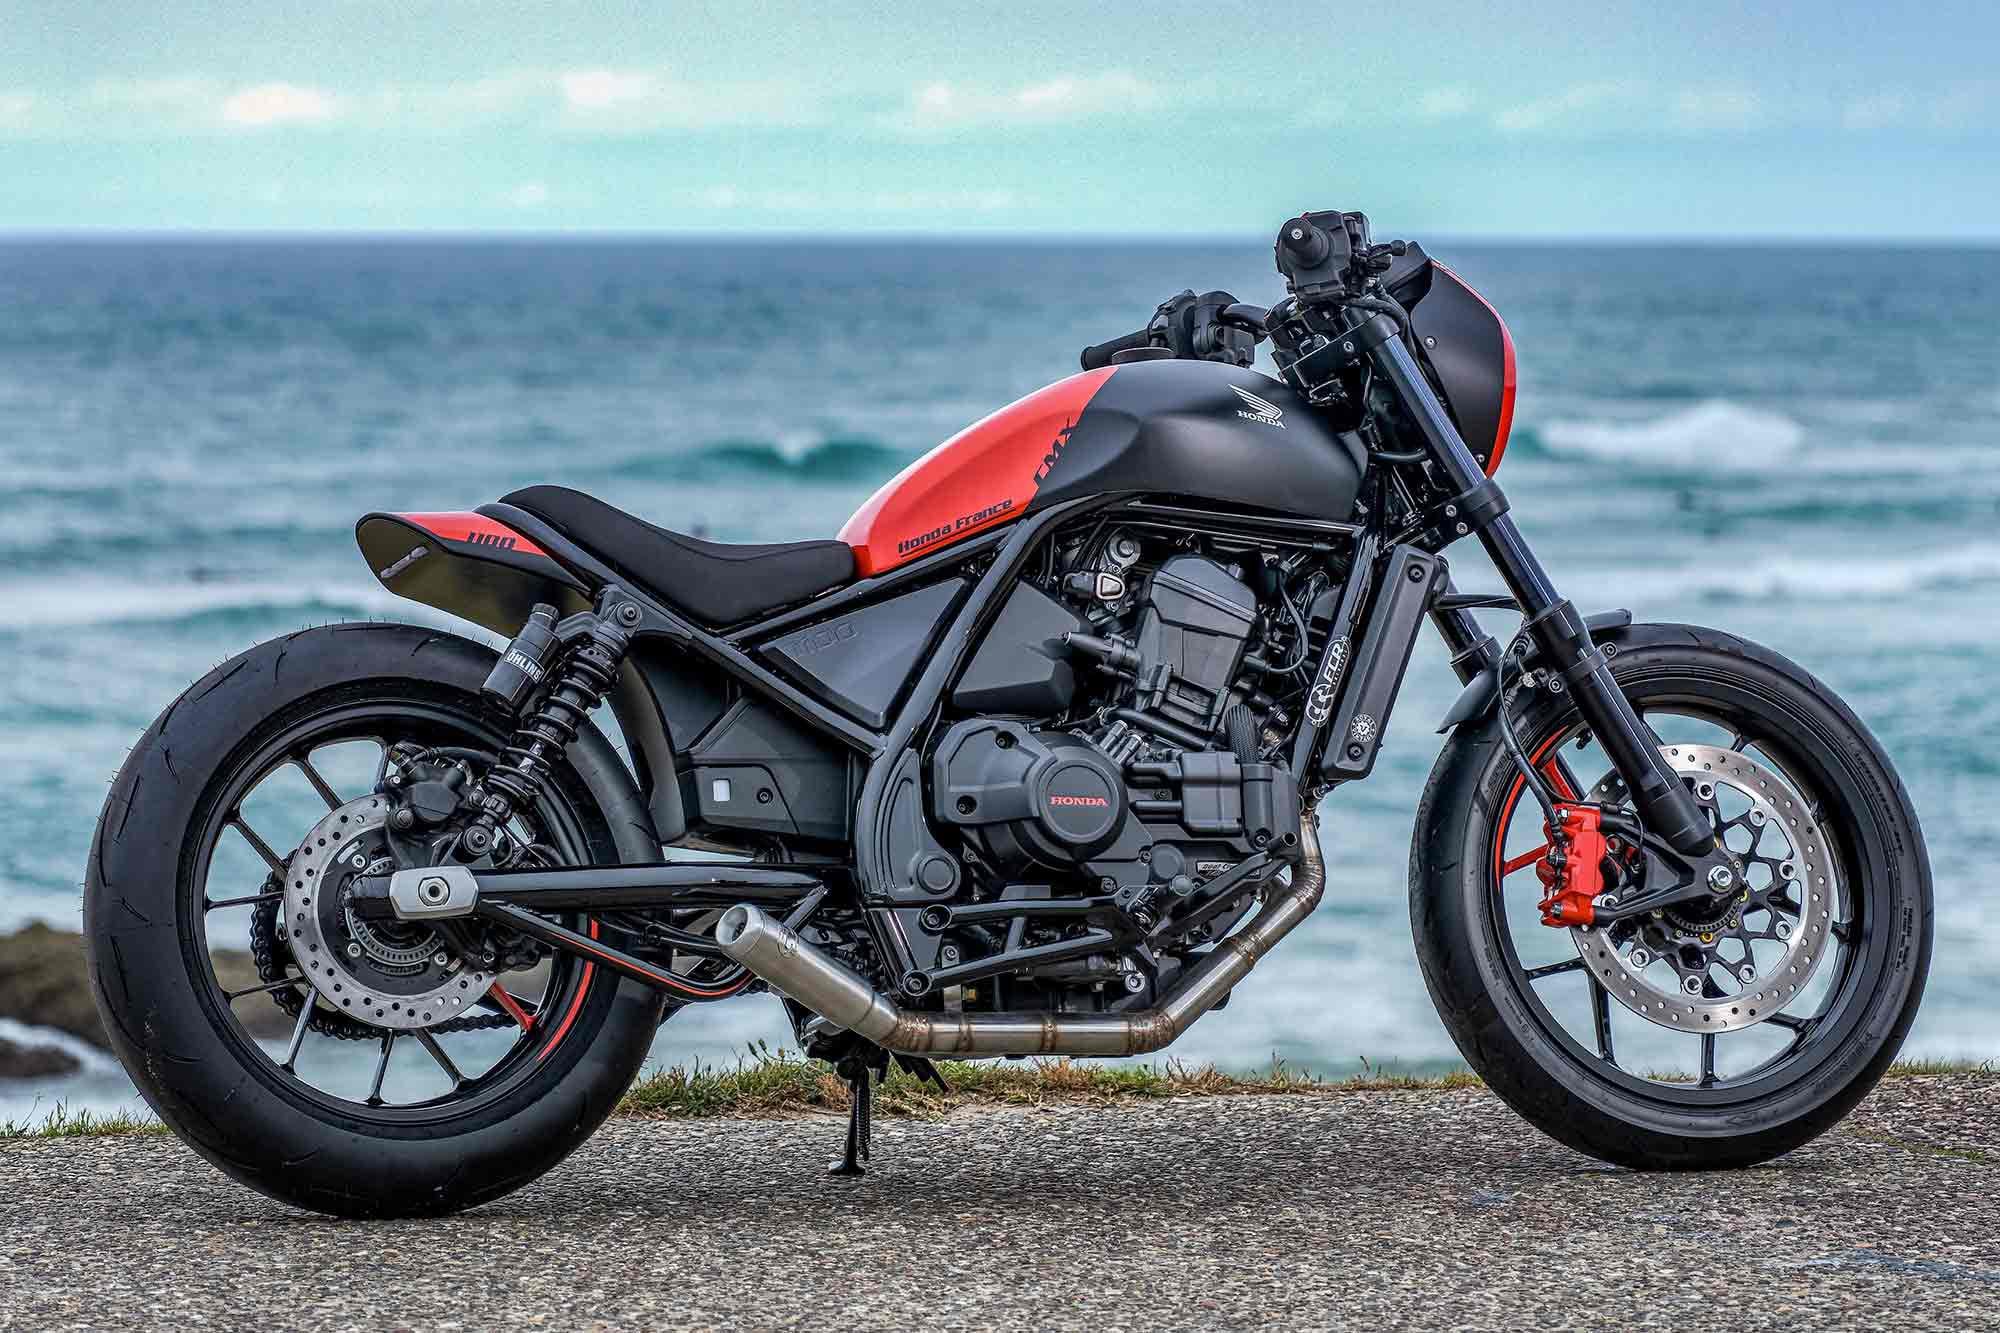 From France’s FCR Original comes The Sport, a more aggressive Rebel 1100 with custom bodywork.